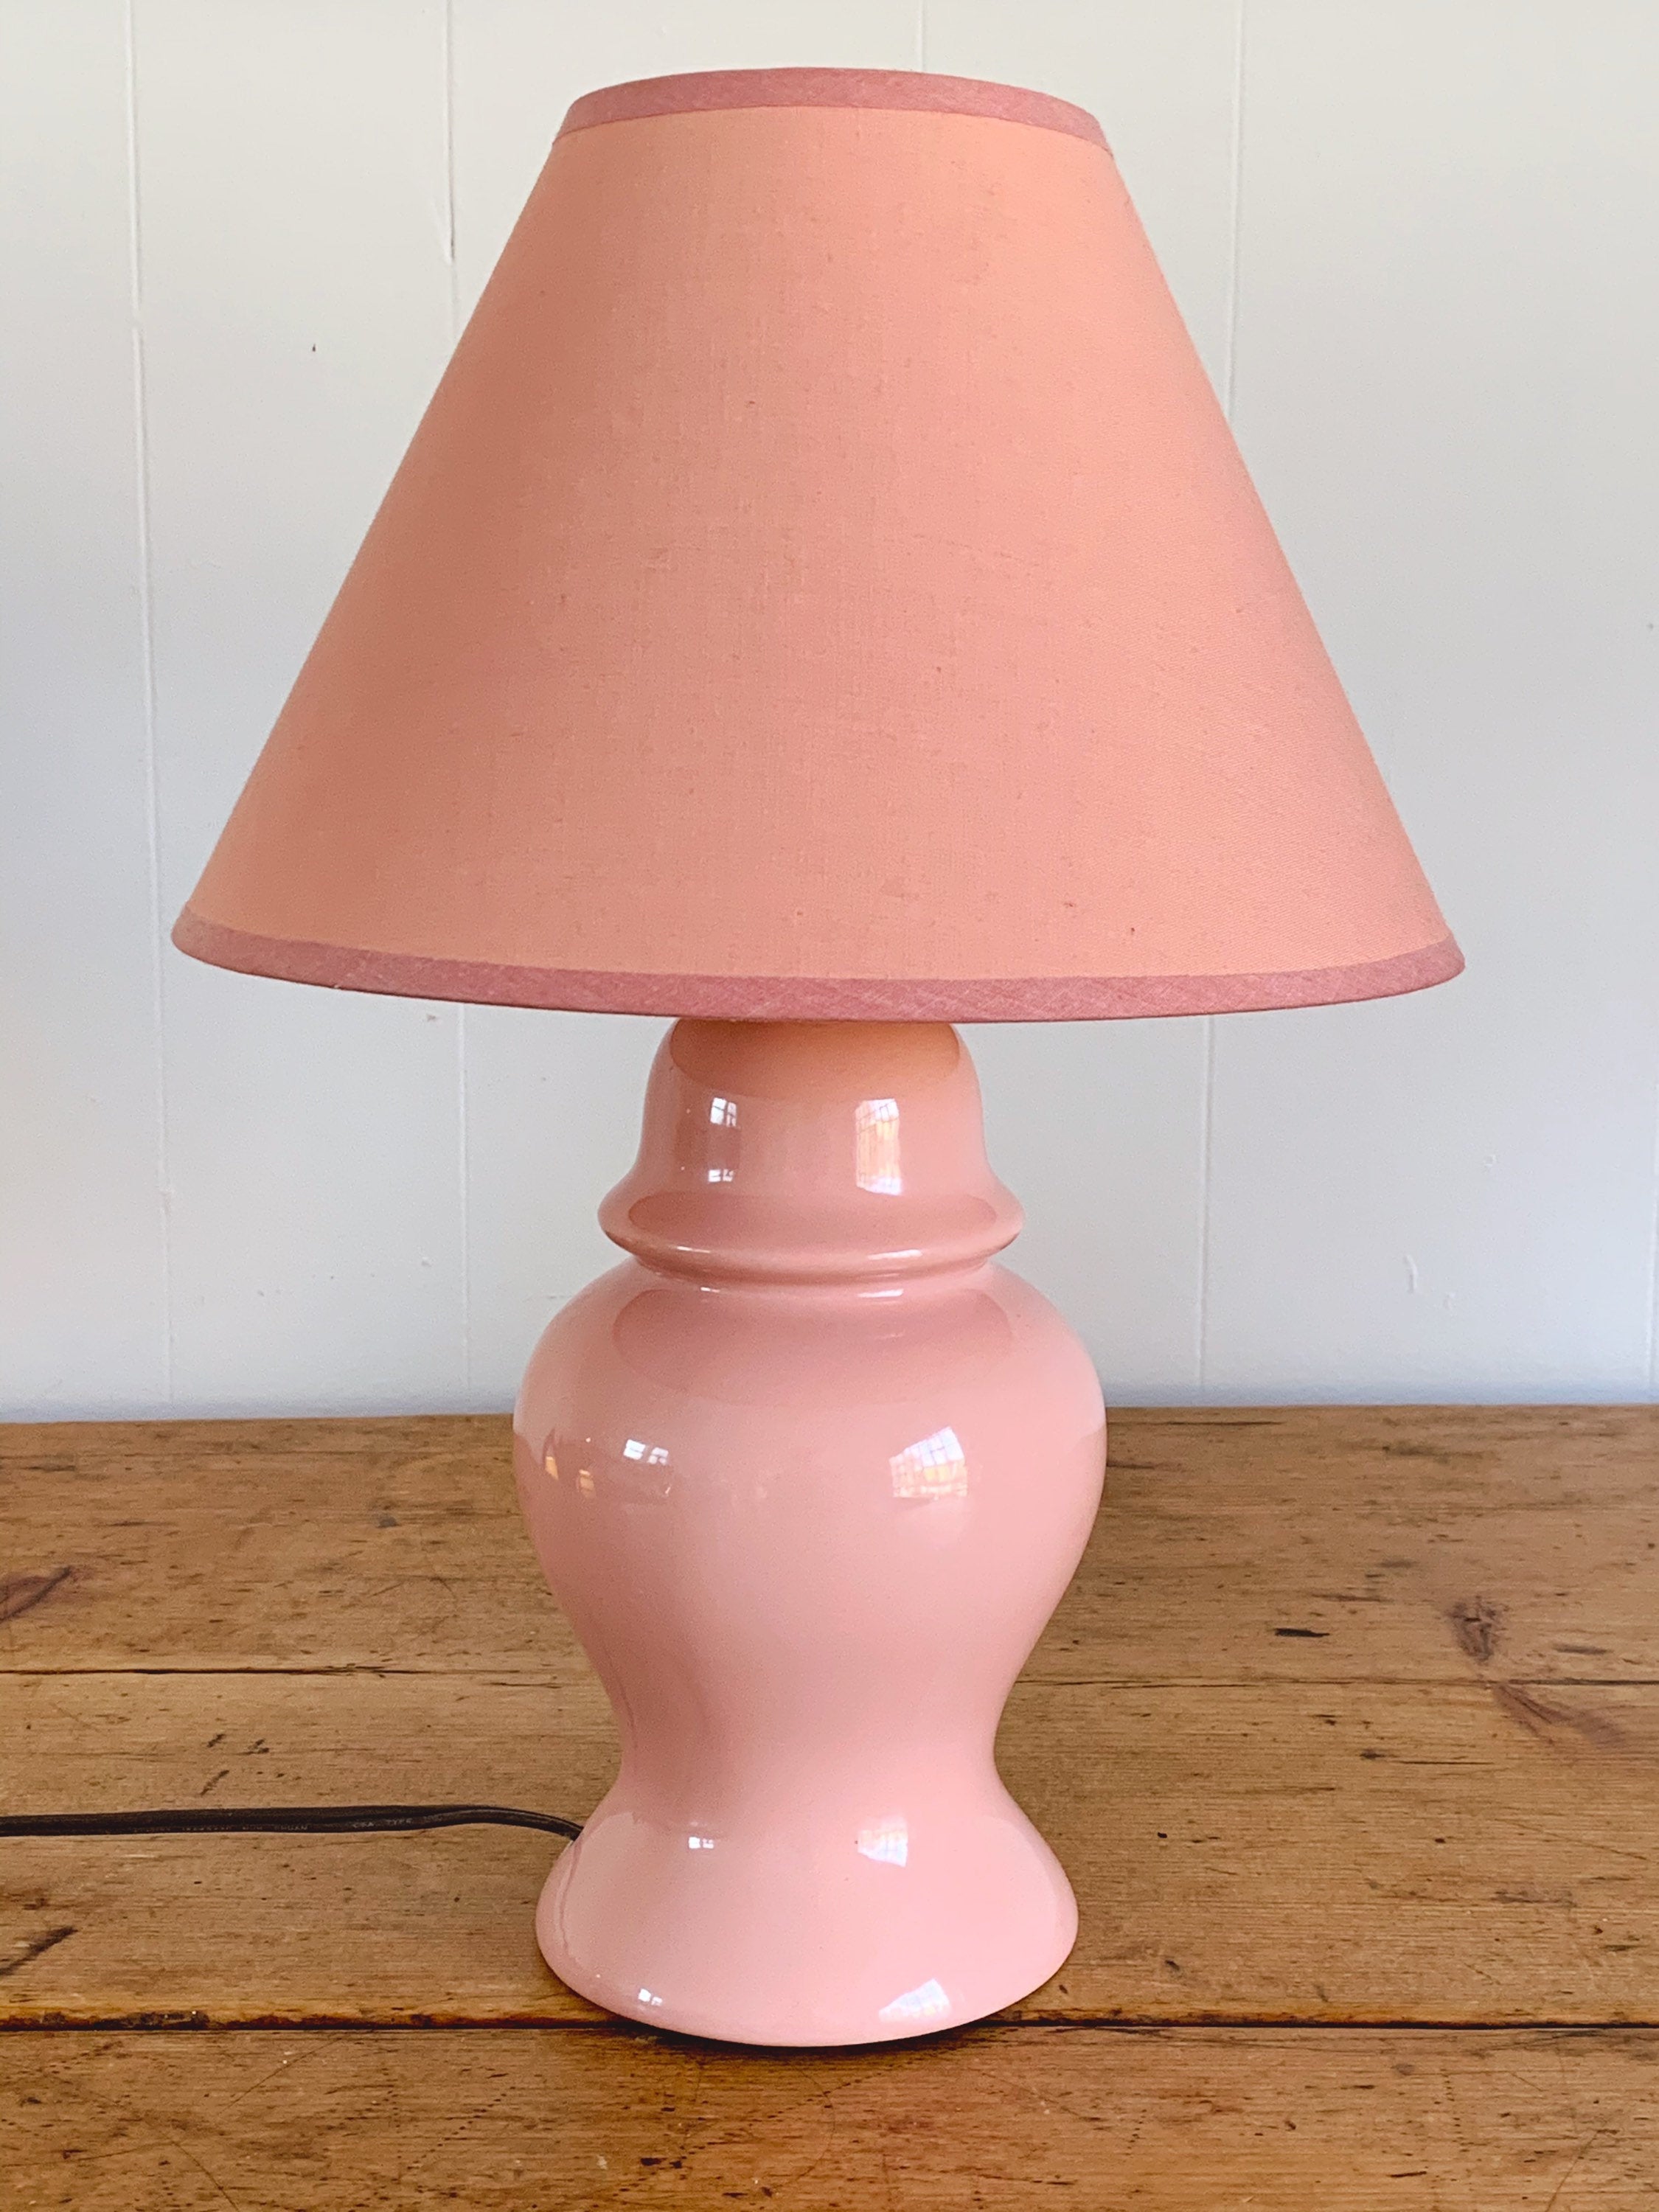 Vintage Ceramic Table Lamp in Millennial Pink and Powder Blue with Matching Shade | 15" and 13" Kids Room Lighting Nursery Decor